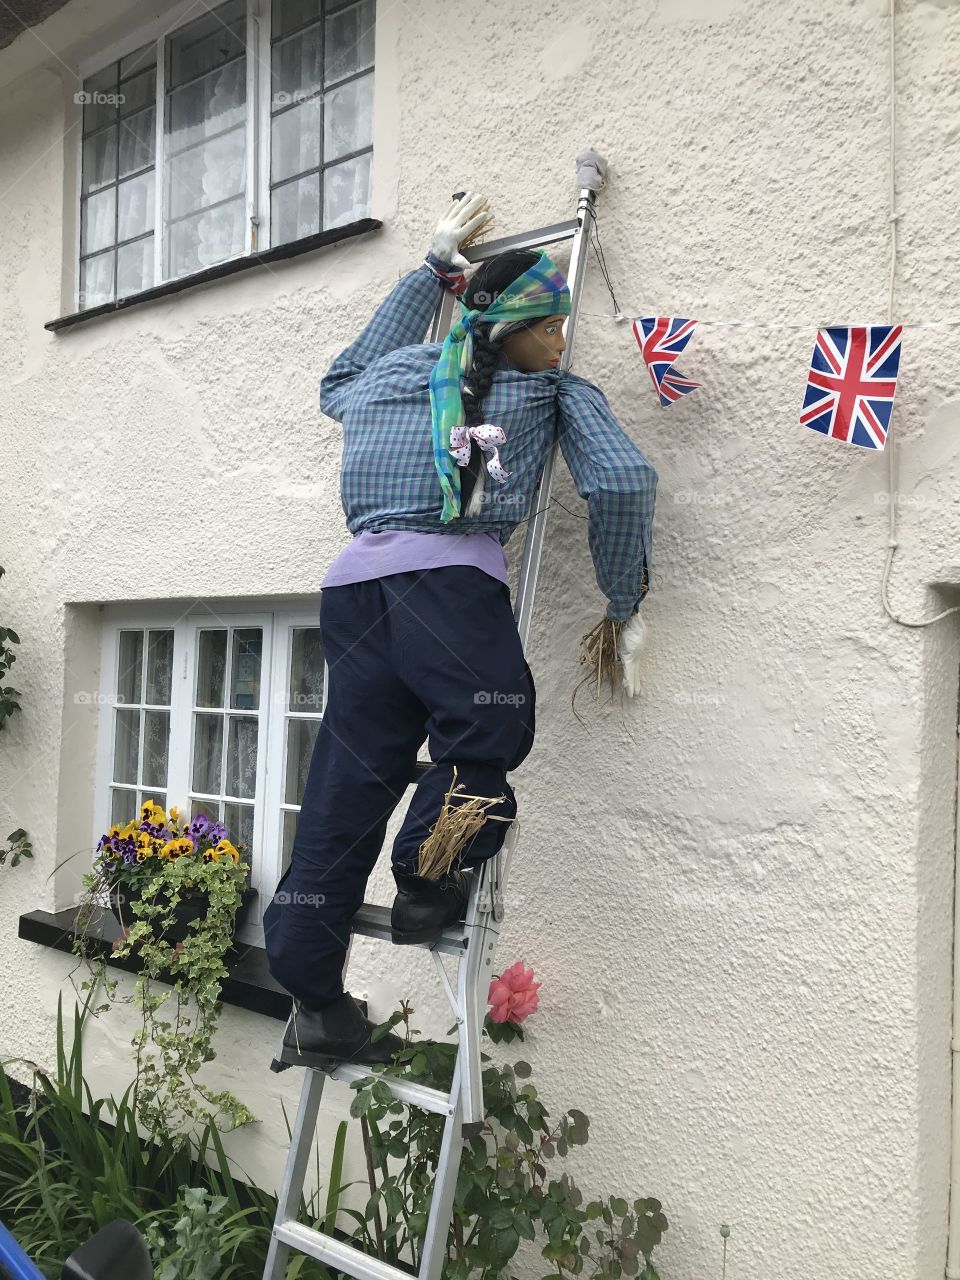 The second of two scarecrows who perhaps have time to clean some windows, to while away their time.